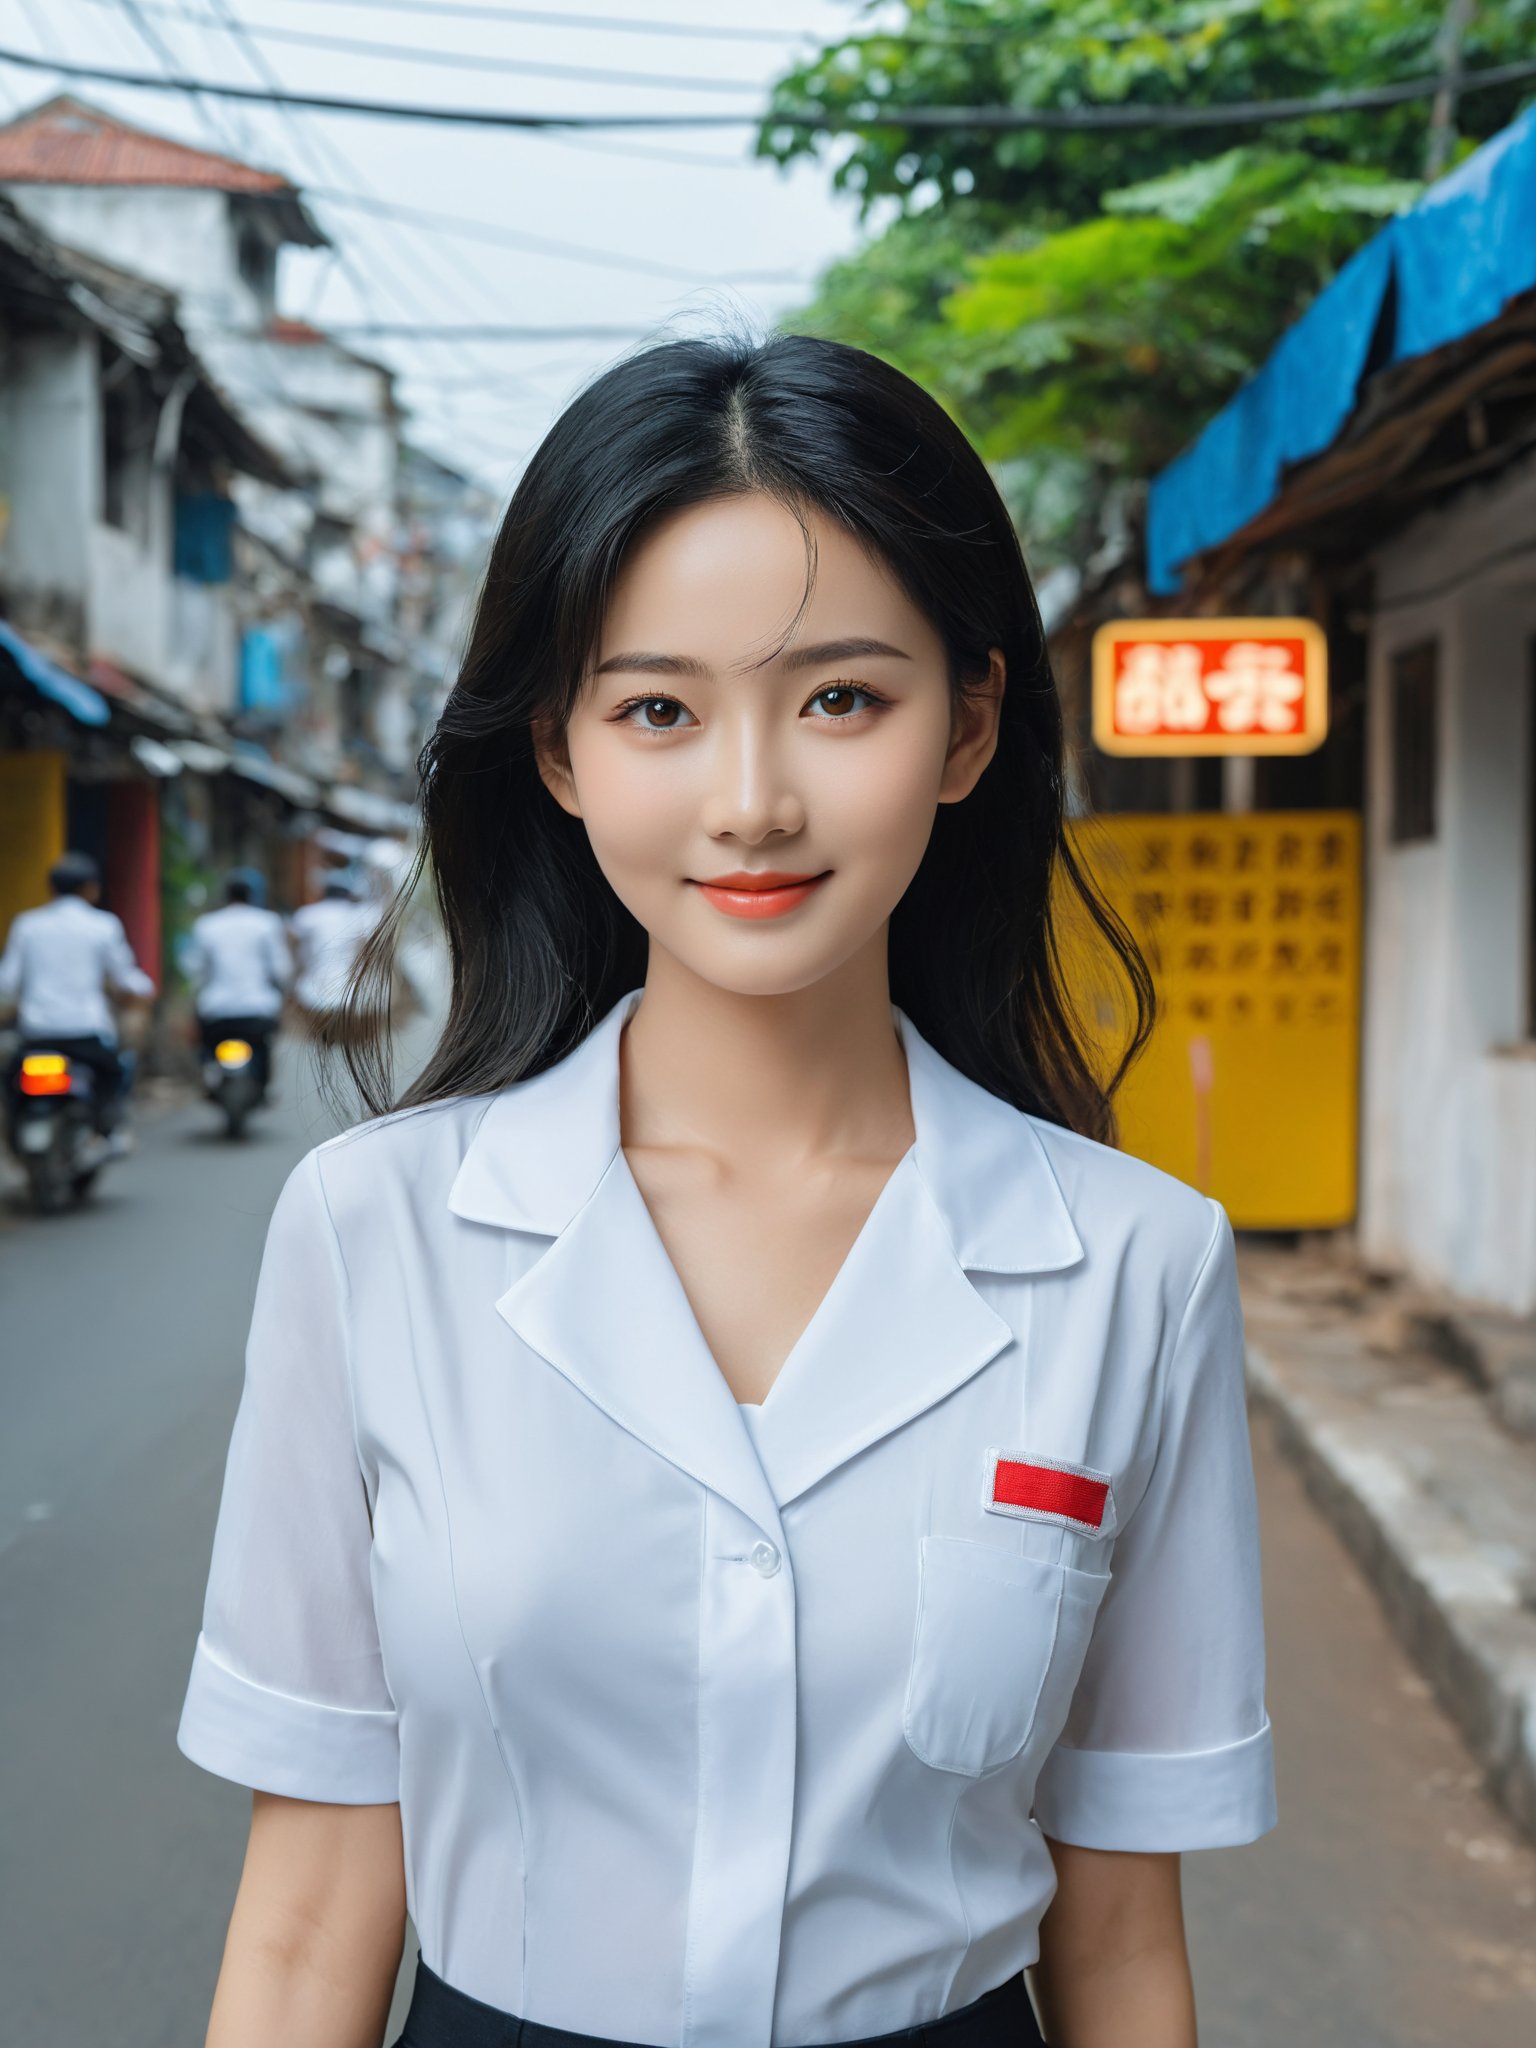 masterpiece, best quality, realistic, photo, real, incredibly_absurdres, Ultra HD, Affectionately looking at you, 8K, UHD, in the vietnamese city street, full body, hand salute, bust photo,The 20-year-old vietnamese girl, She has black hair, nurse shirt outfit, The lines of her face are soft and smooth. Her skin is as fair as snow, soft and delicate, and her eyes are bright and bright, deep and mysterious, making people feel endless charm and appeal. The eyebrows are slender and graceful, the nose is straight and noble, the lips are rosy and seductive, and the slightly raised angle reveals confidence and elegance. Her facial features are delicate and three-dimensional, with well-defined contours, like a fine painting or a finely carved work of art. The overall feeling is gentle, elegant, noble and full of charm, huge_filesize, bust, girl, kawaii, adorable girl, bishoujo, ojousama, idol, wavy hair, long hair, black hair, beautiful detailed eyes, looking at viewer, seductive smile, black eyes, large breasts, arms behind back